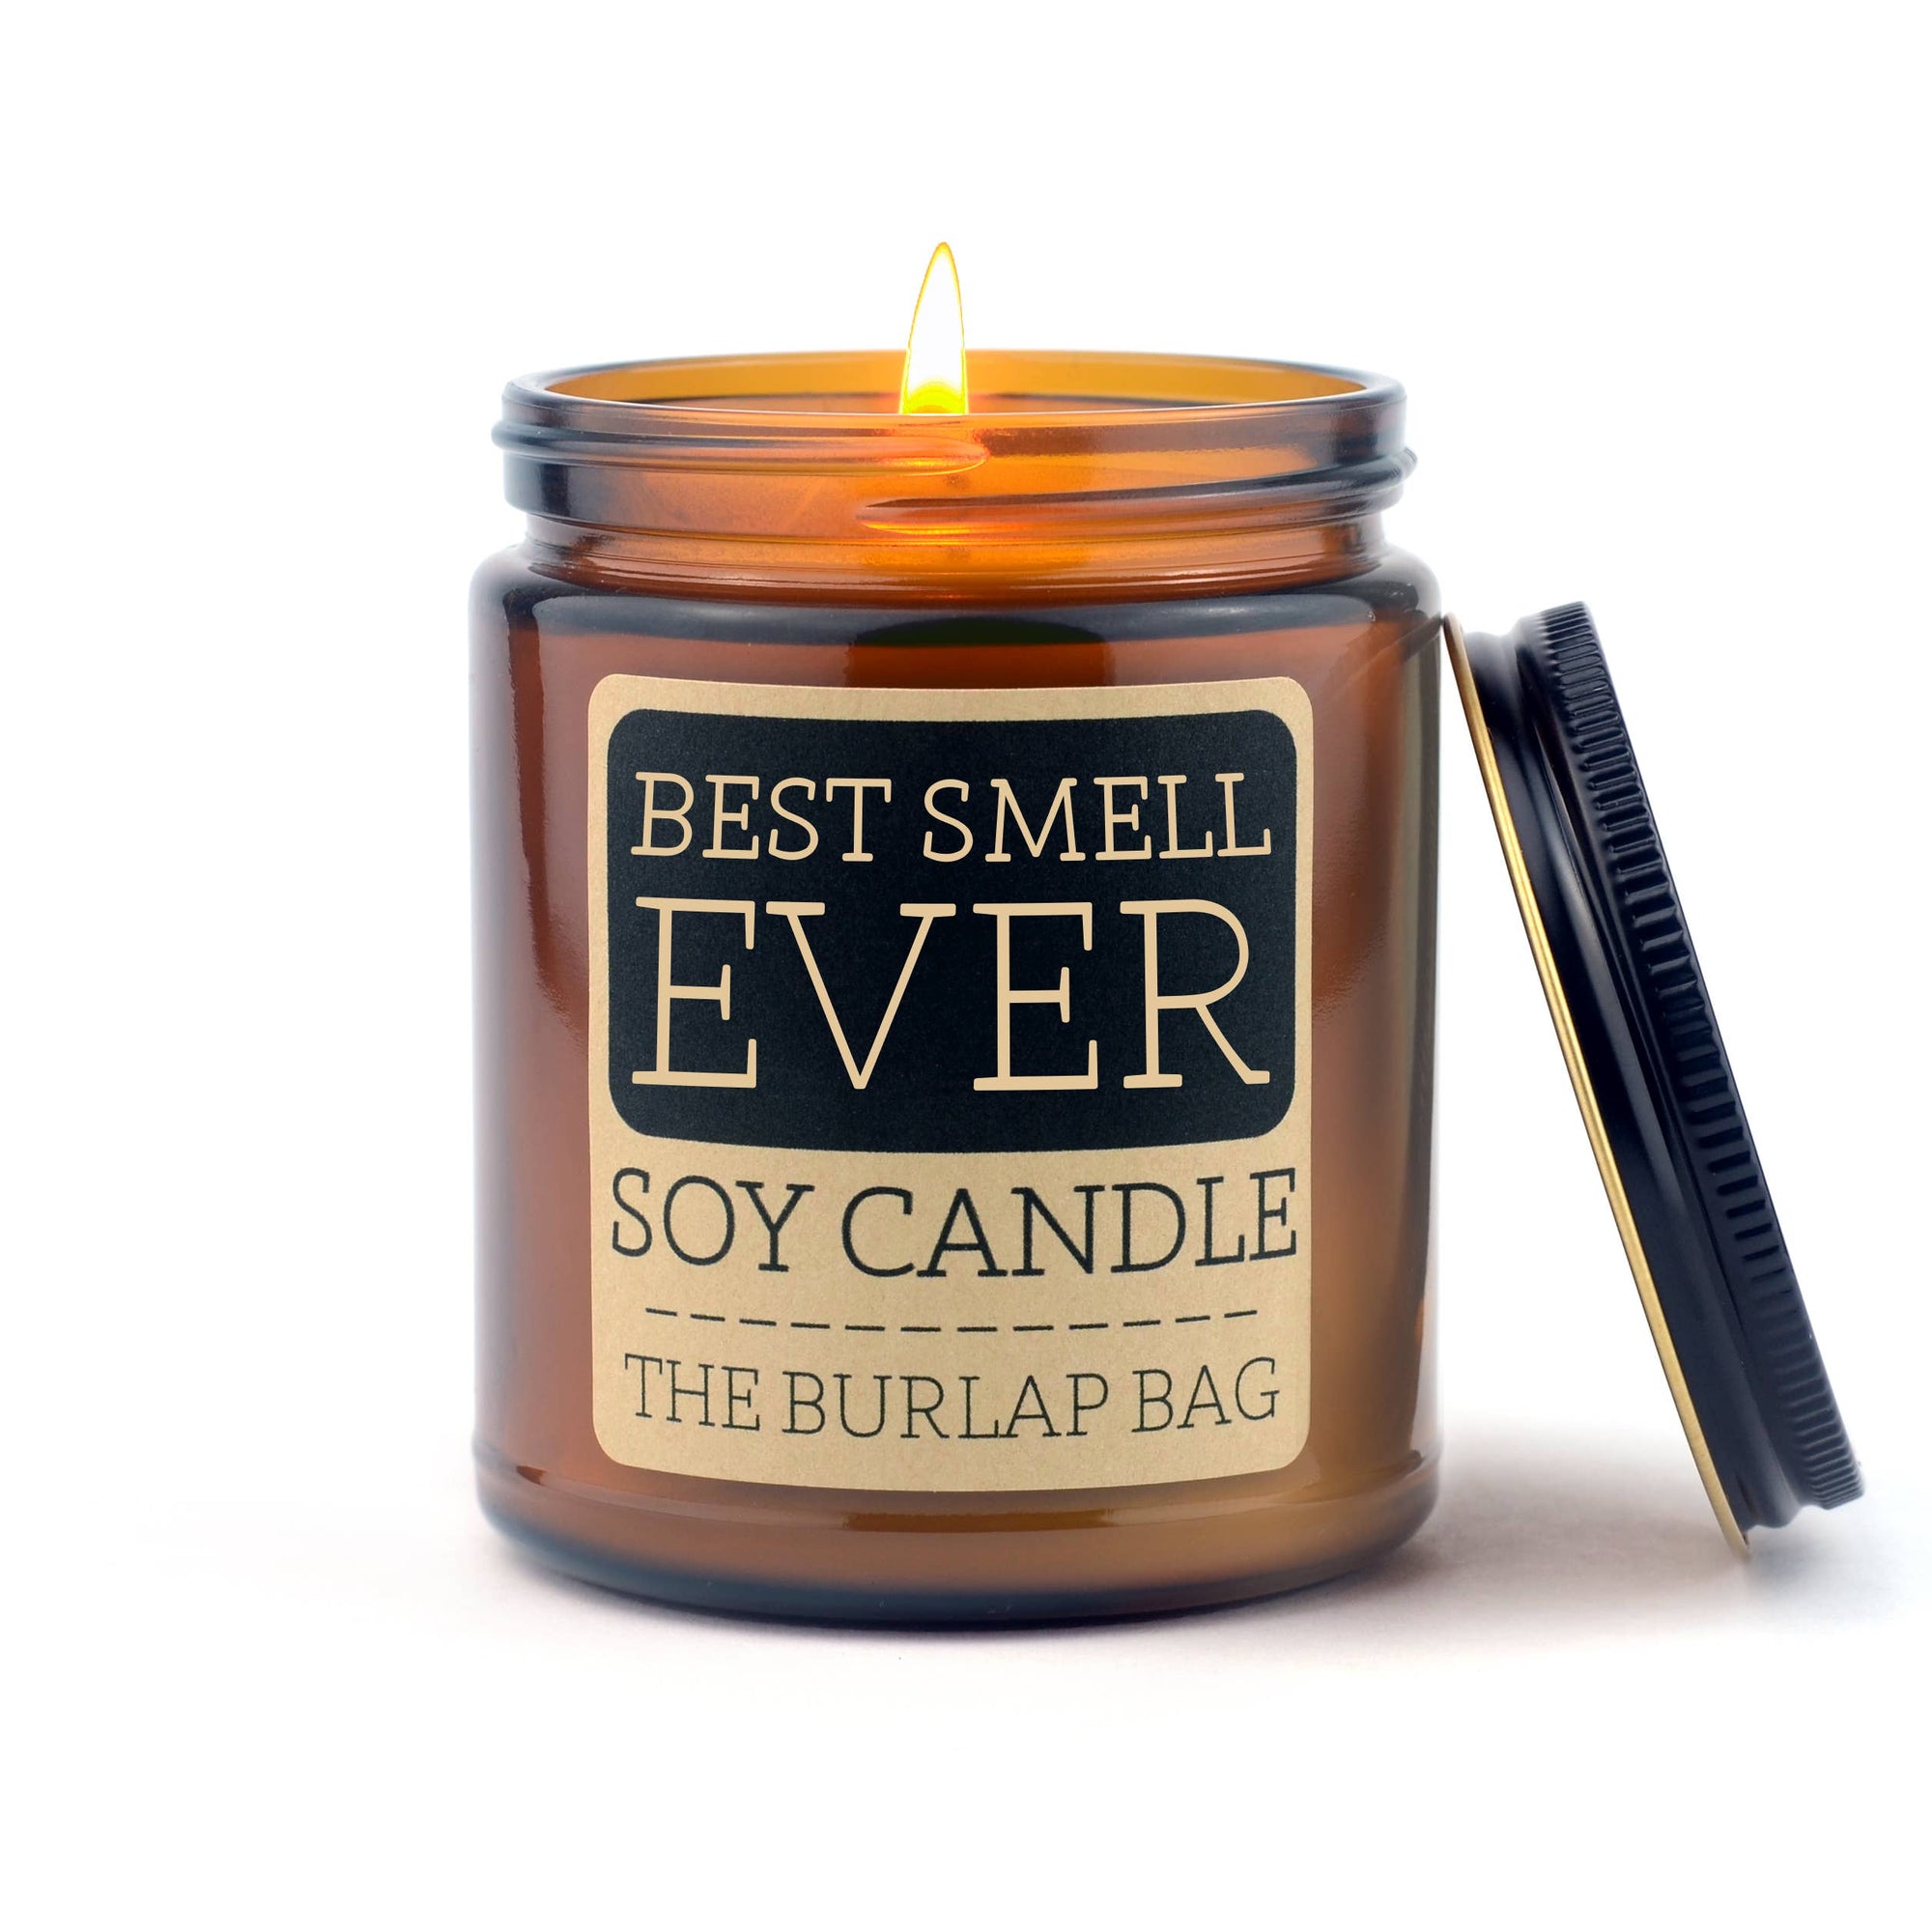 Best Smell Ever Soy Candle 9oz